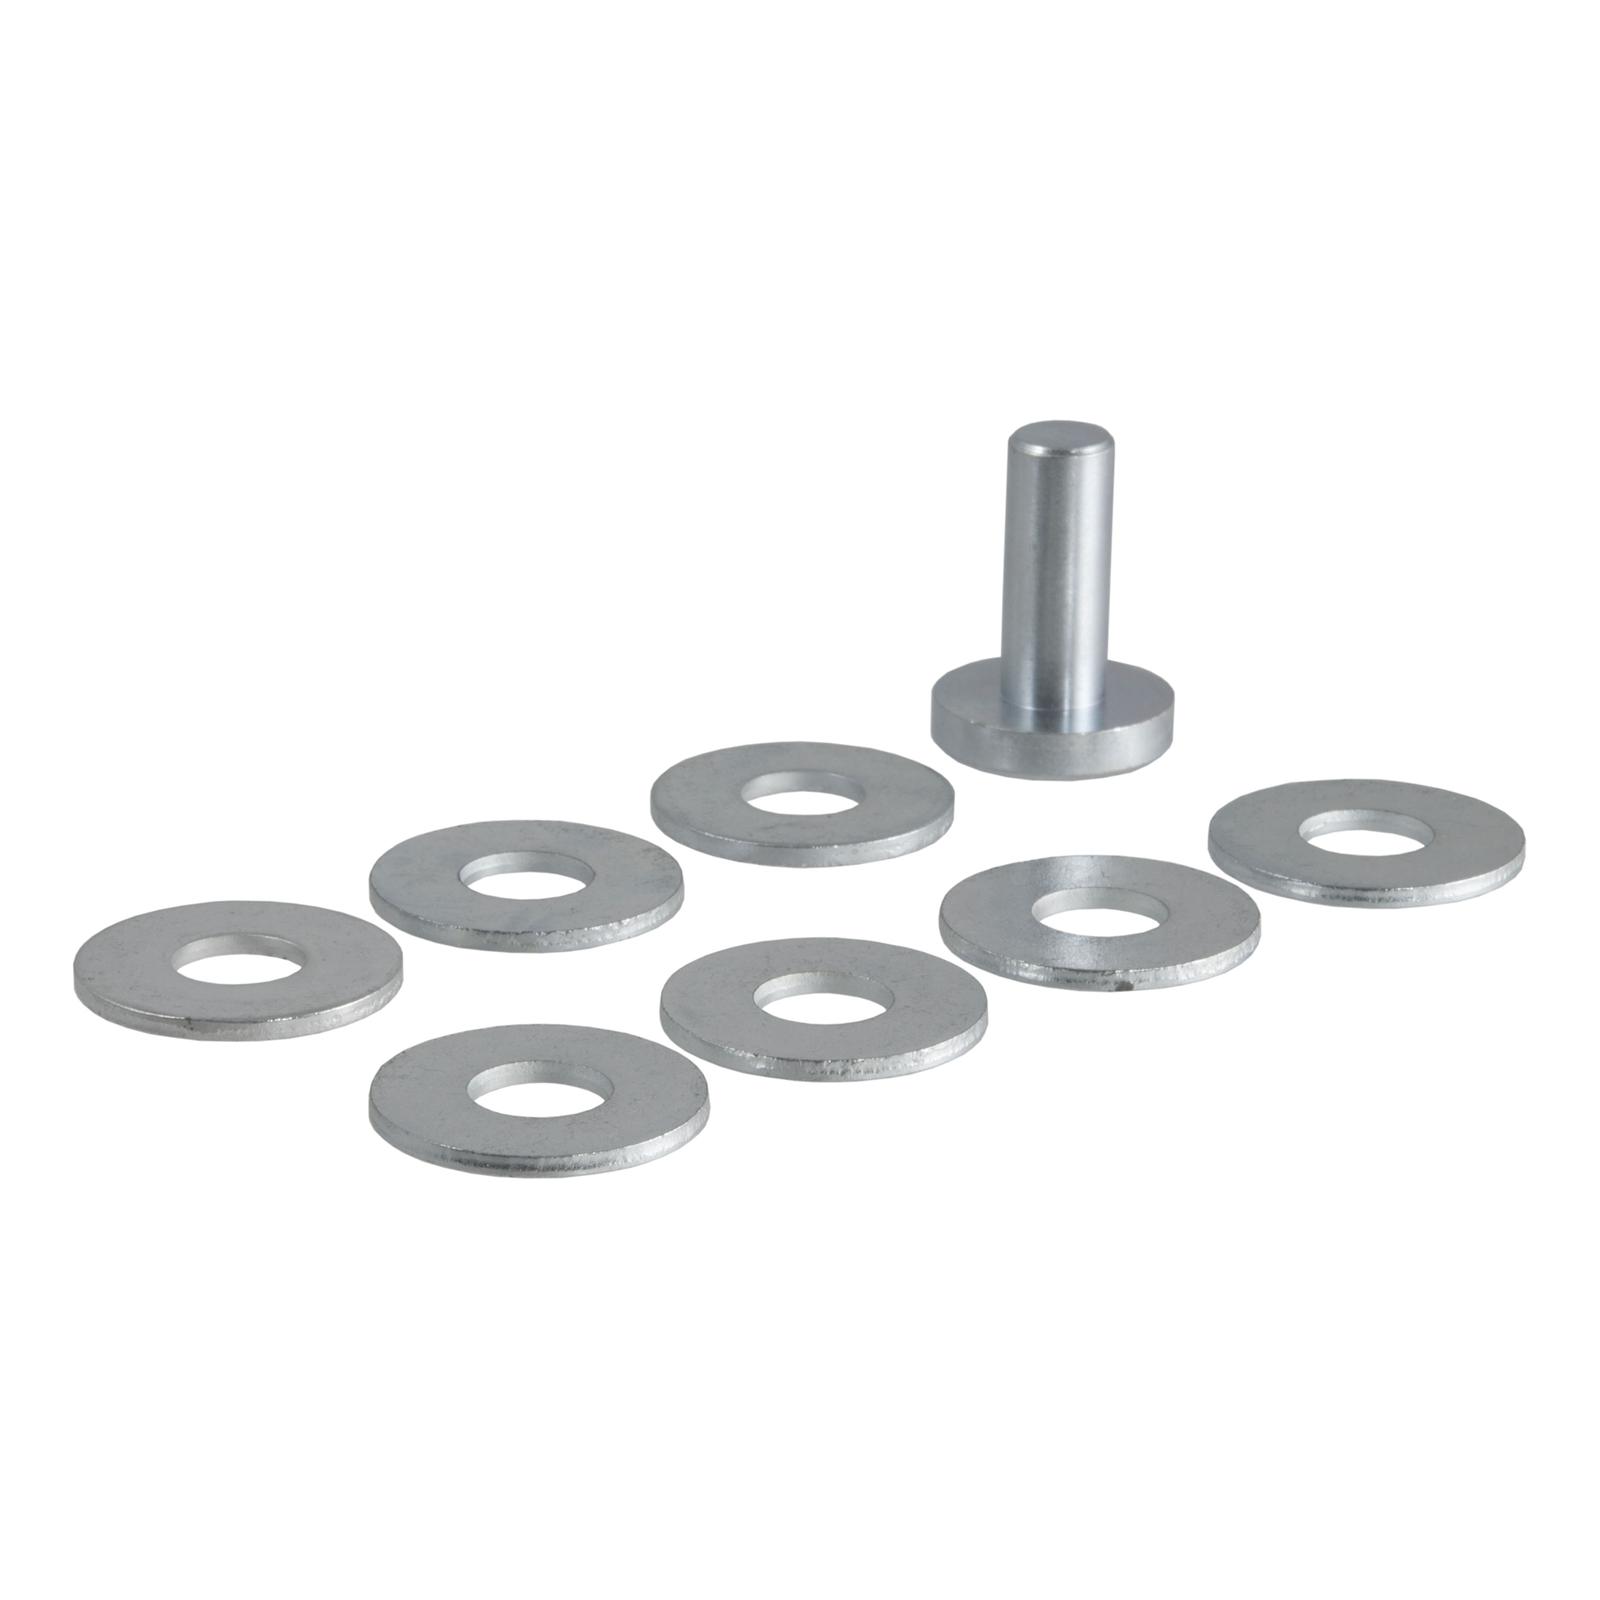 Hardware - Weight Distribution Replacement Parts - CURT Manufacturing